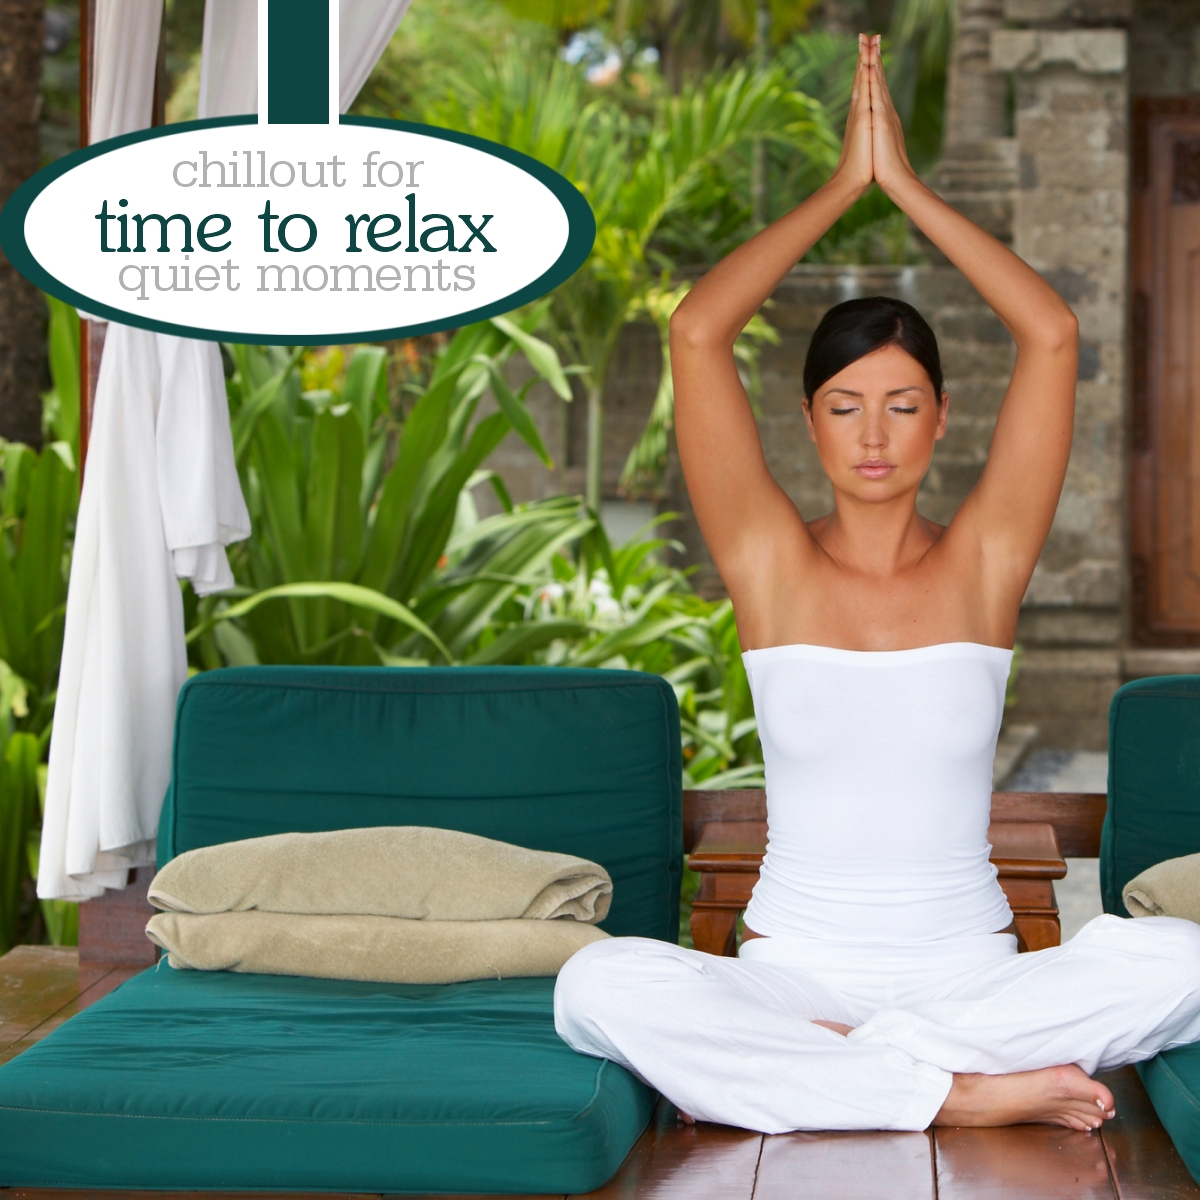 Time To Relax - Chillout For Wellness & Spa